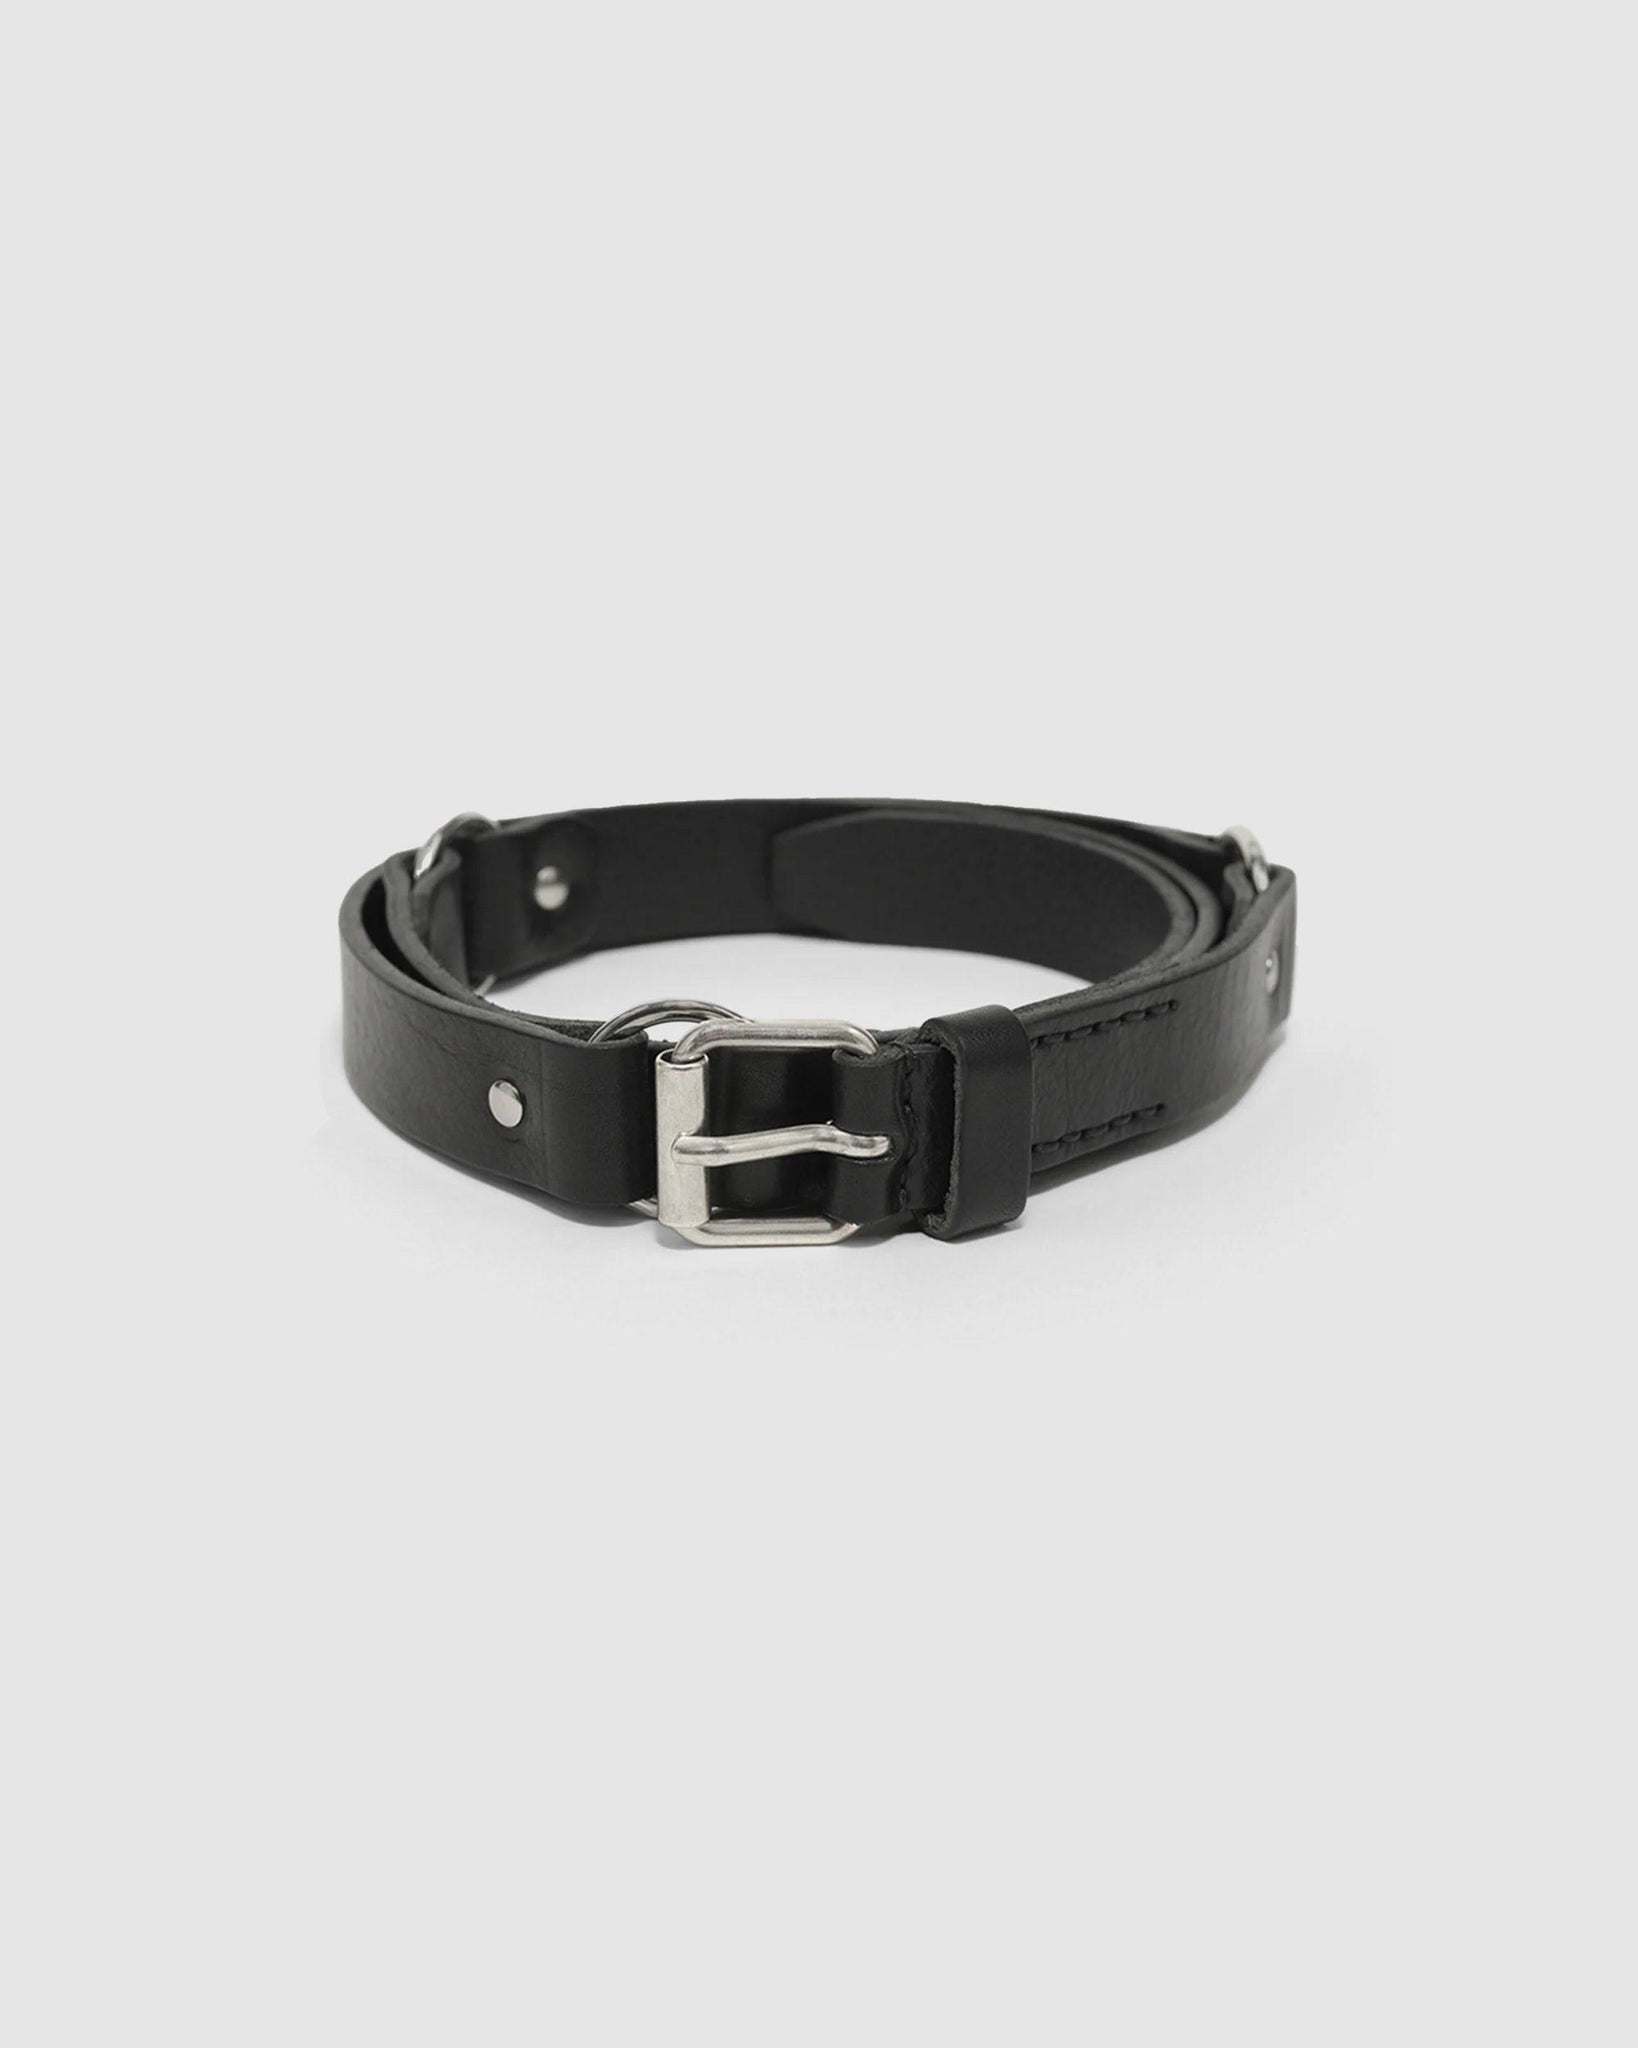 2.5cm Ring Belt Grizzly Black Leather - {{ collection.title }} - Chinatown Country Club 